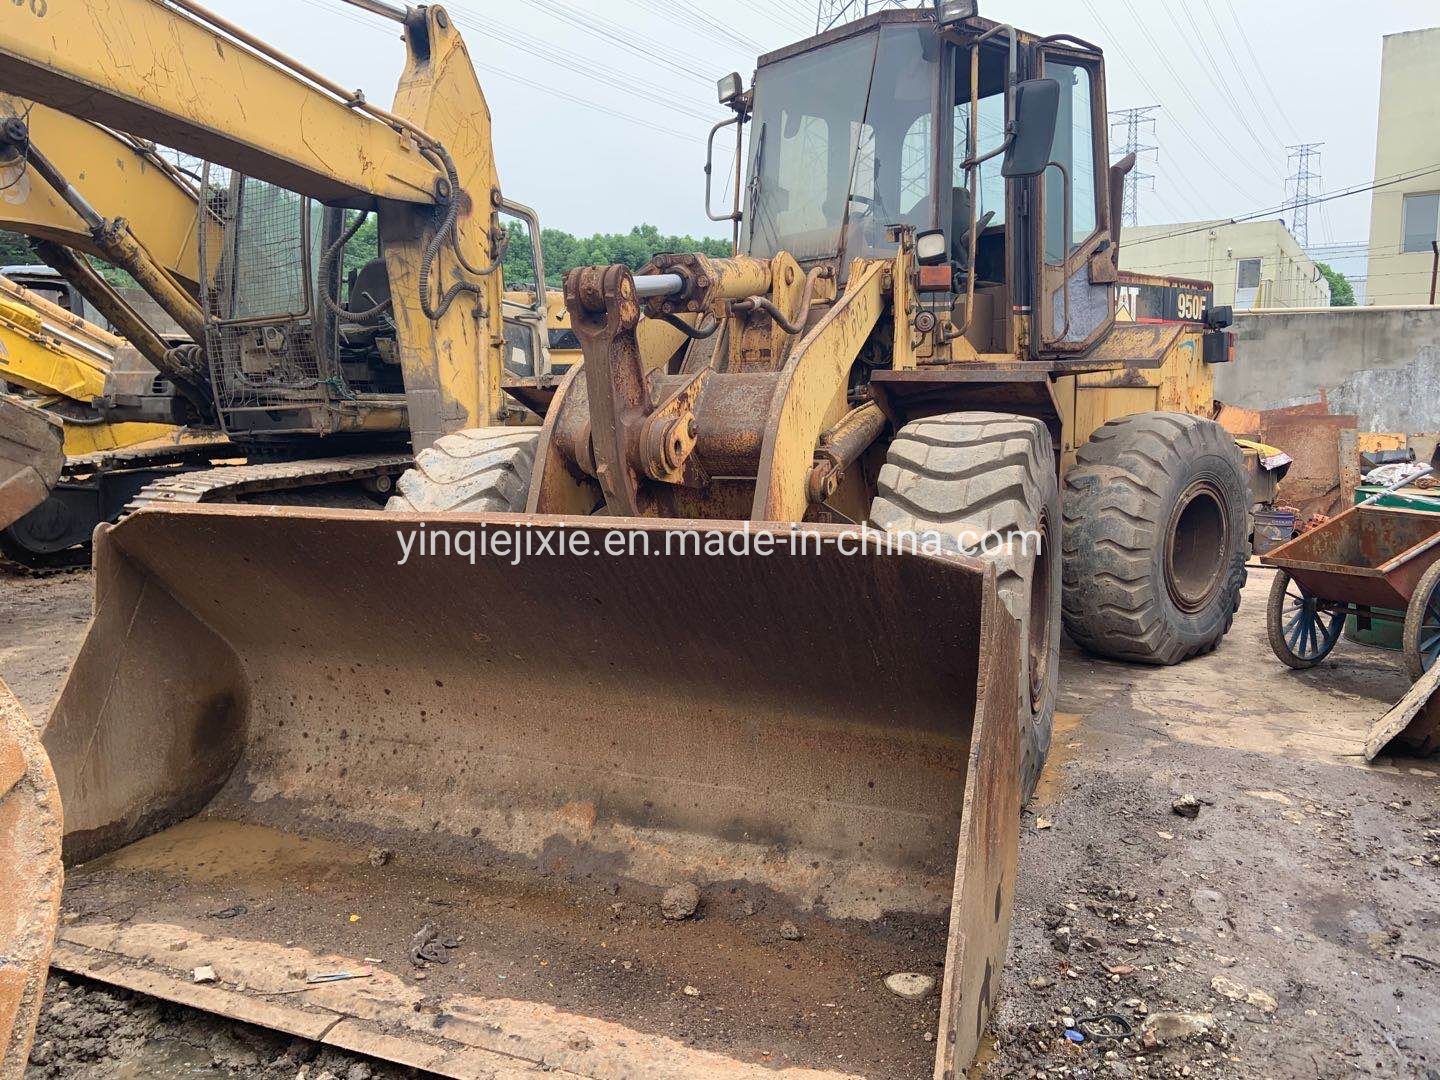 Used Caterpillar 950f Wheel Loader for Sale